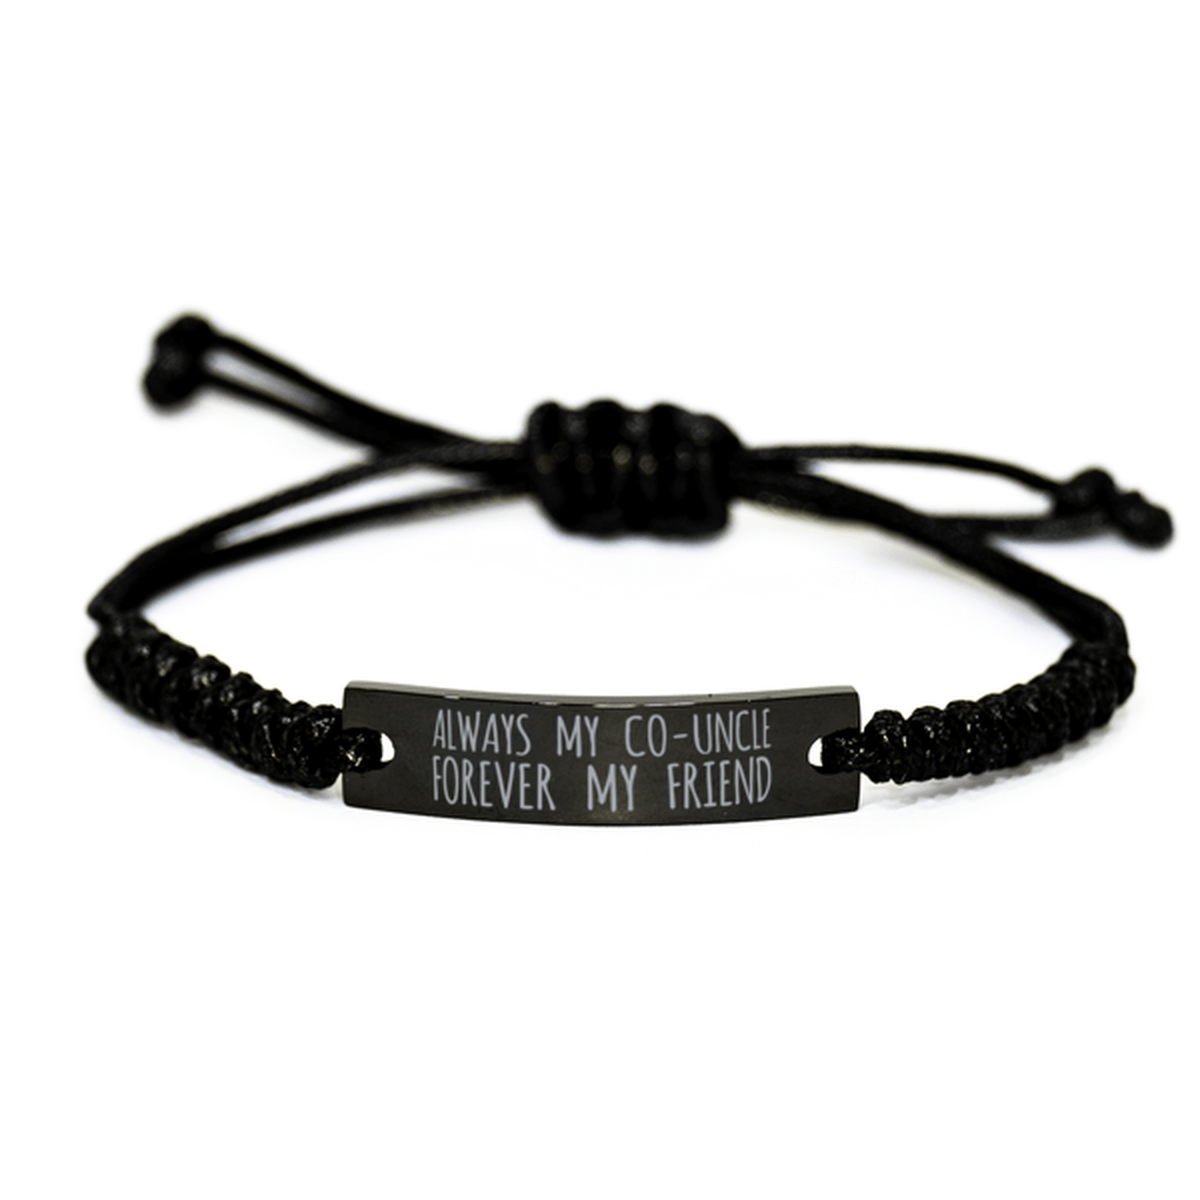 Inspirational Co-Uncle Black Rope Bracelet, Always My Co-Uncle Forever My Friend, Best Birthday Gifts For Family